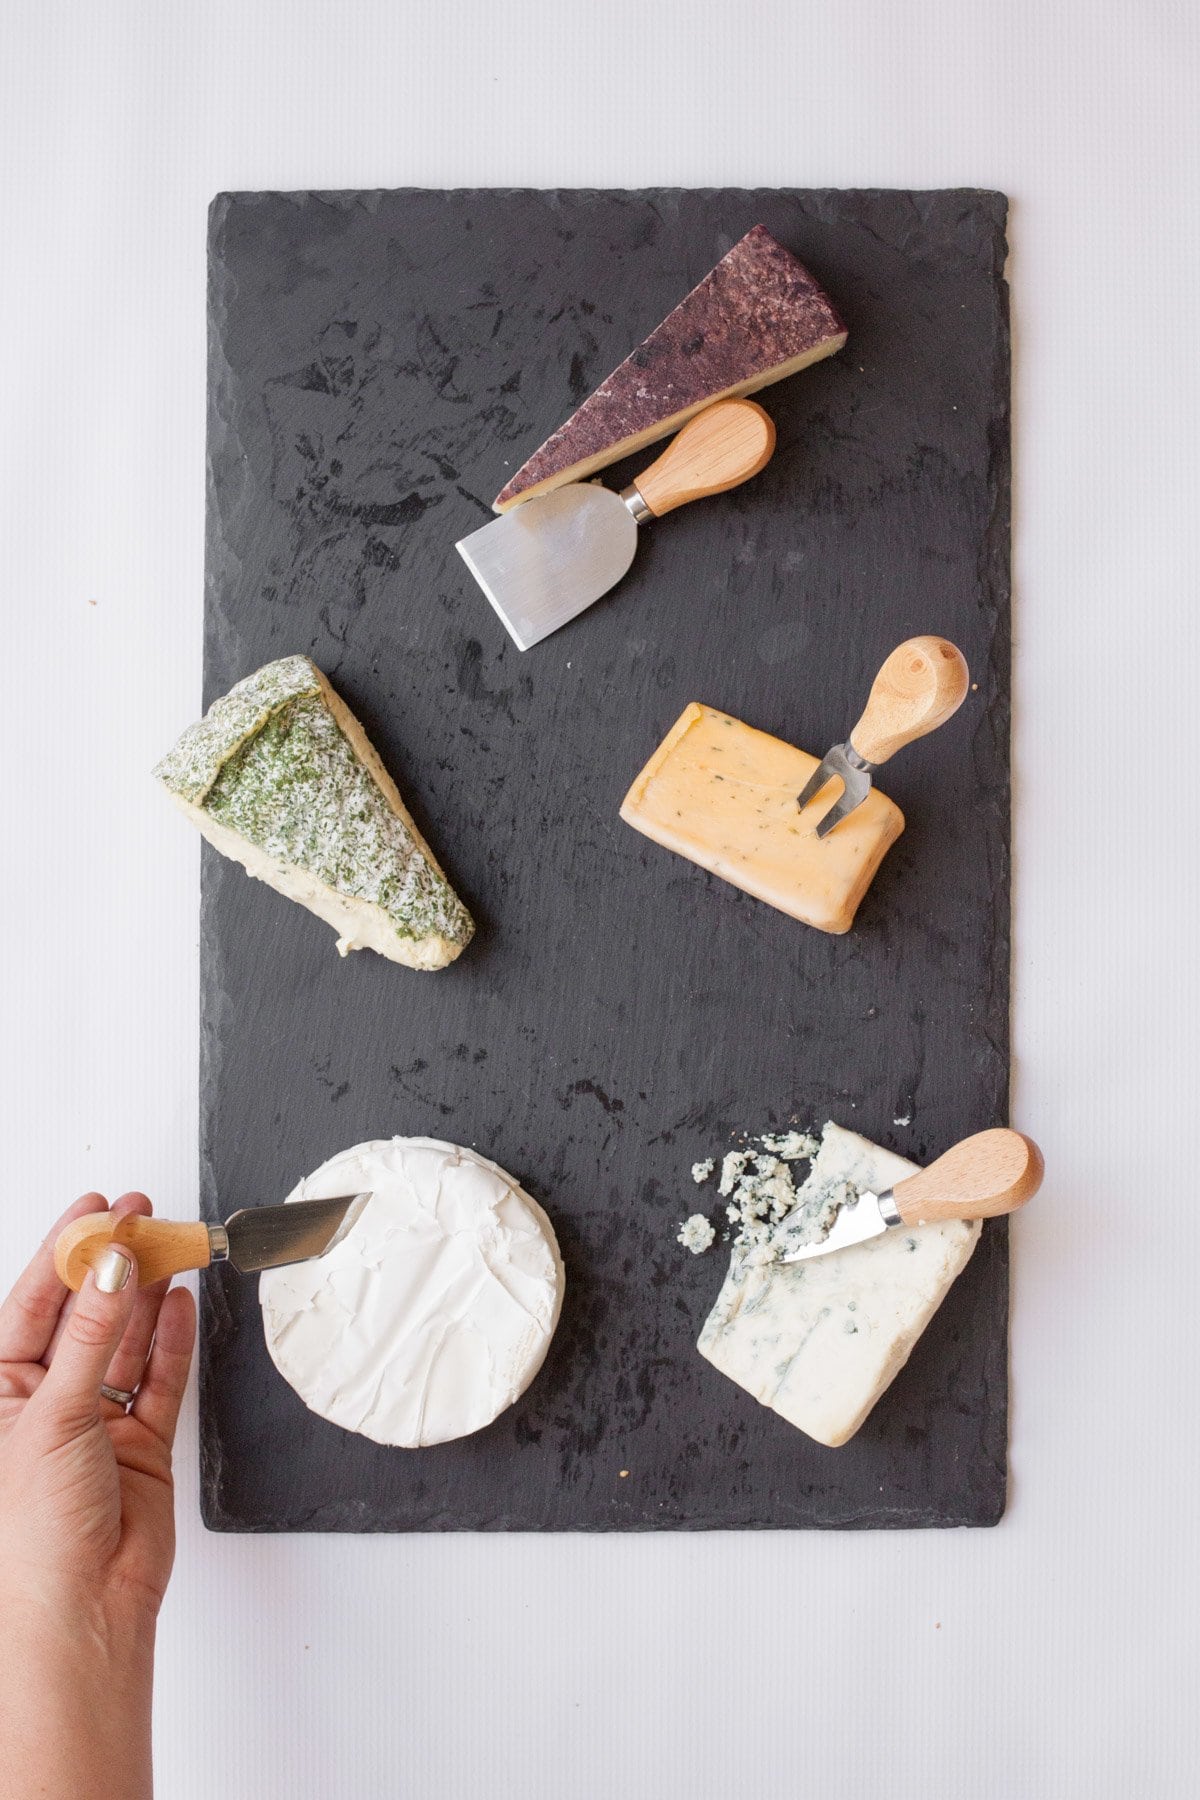 Slate cutting board with 5 wedges of cheese, each with a cheese knife.